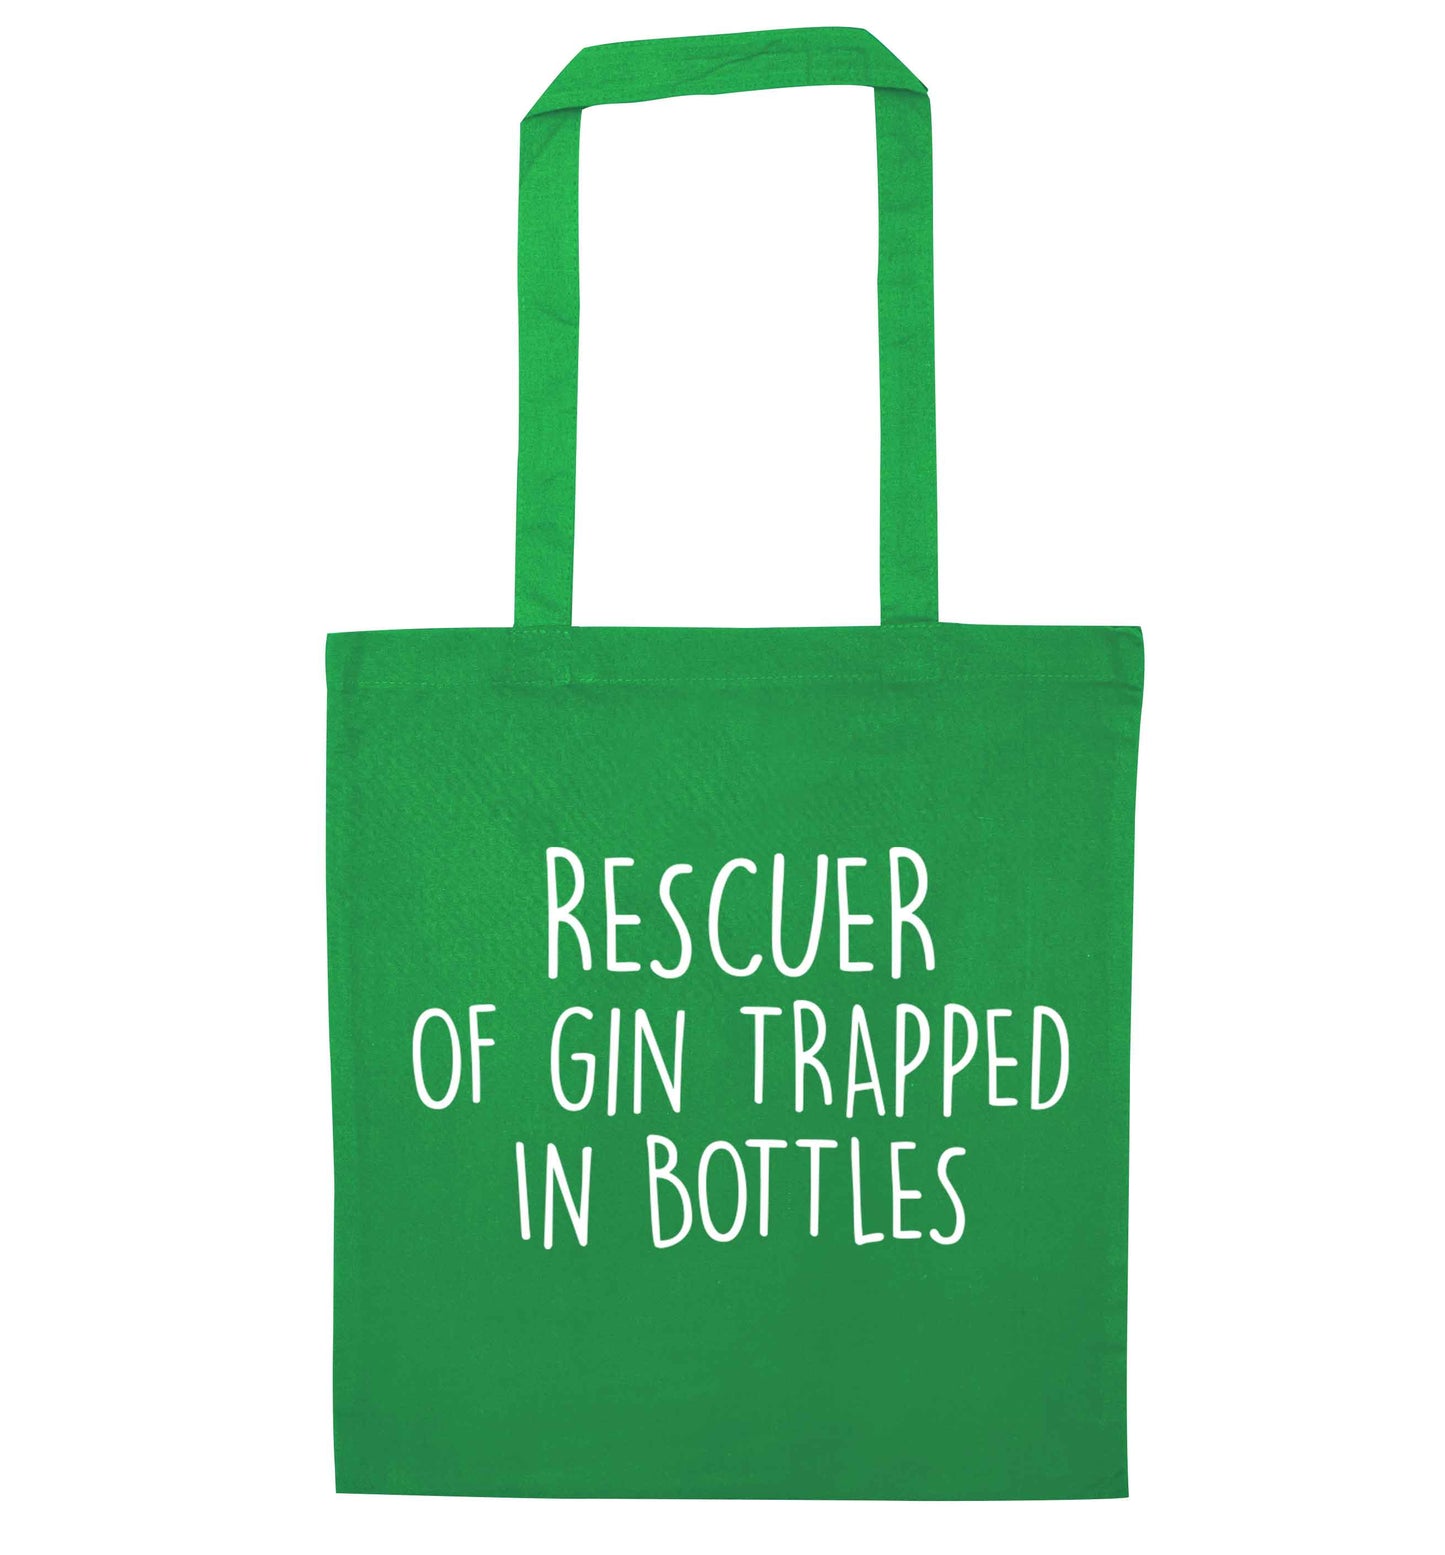 Rescuer of gin trapped in bottles green tote bag